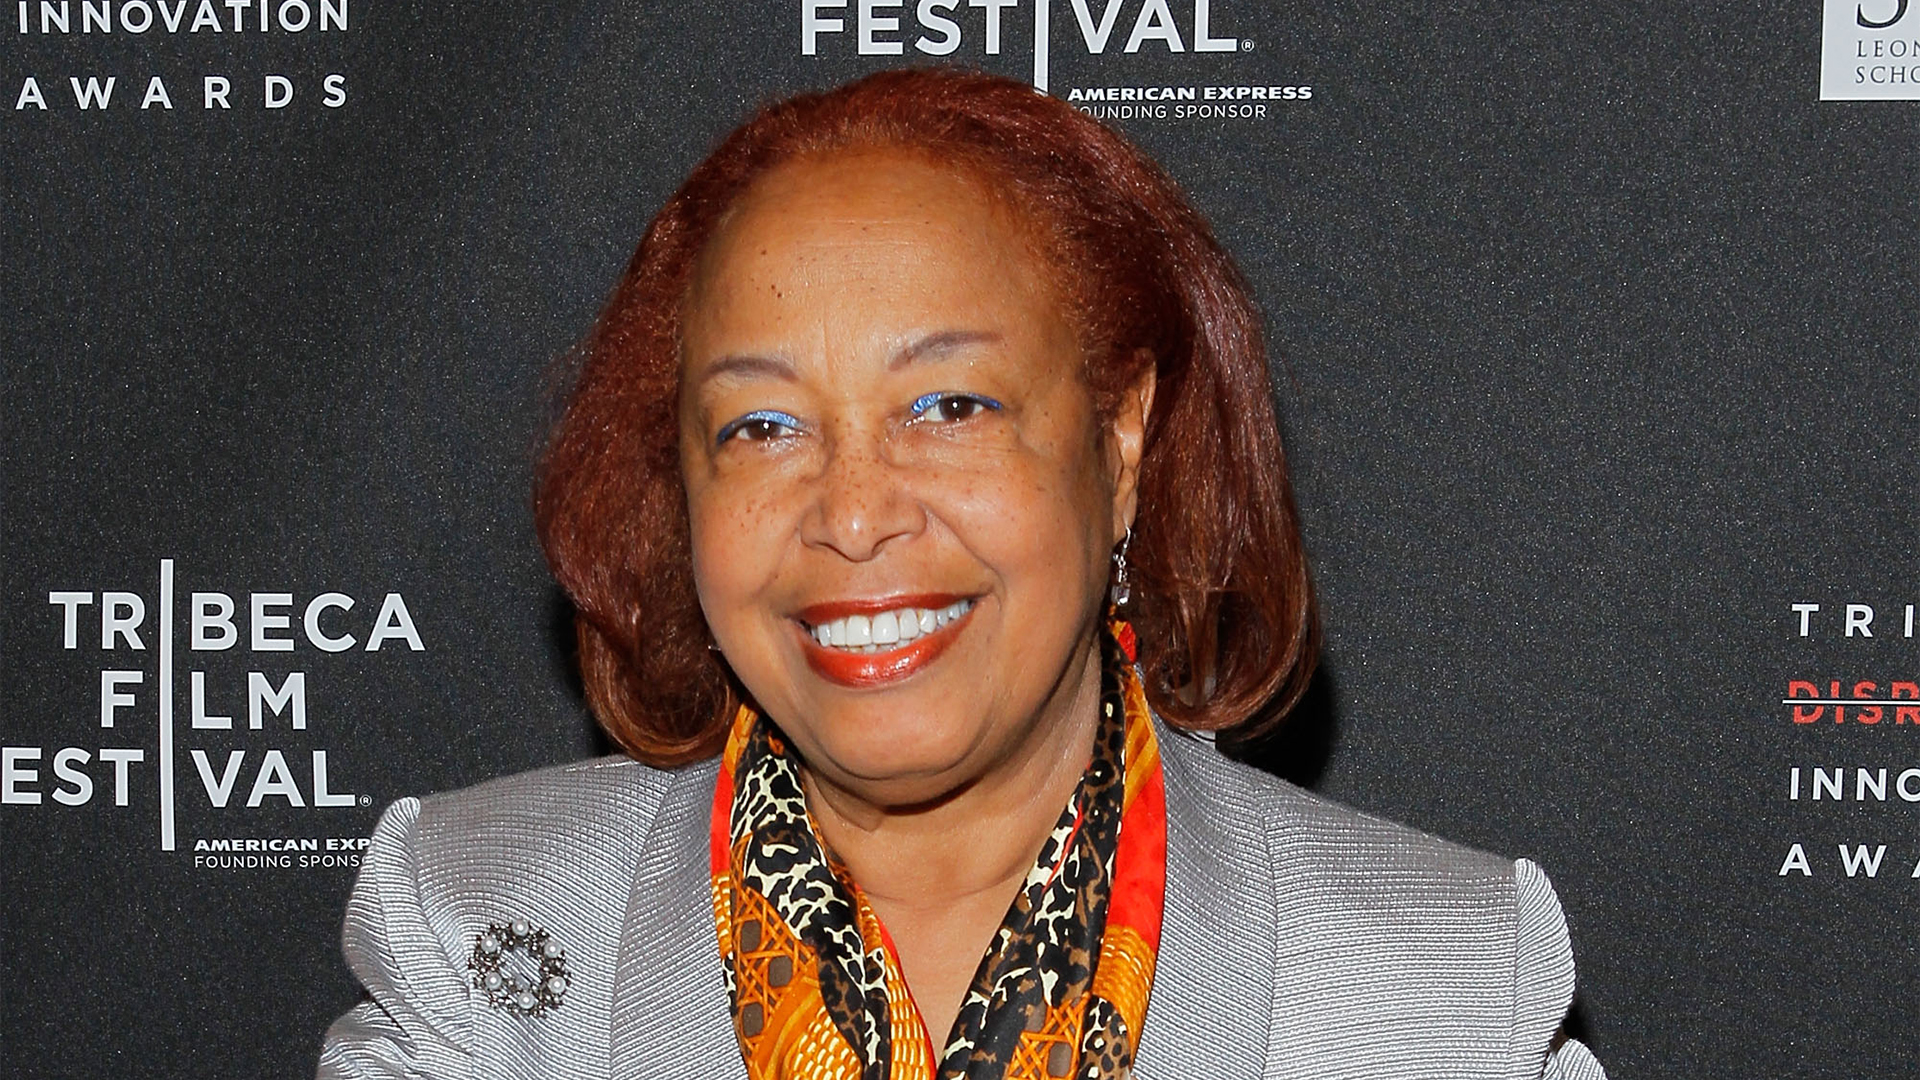 Inventor Of The Cataract Surgery Tool Laserphaco Probe, Dr. Patricia Bath, Was Inducted Into The National Women's Hall Of Fame